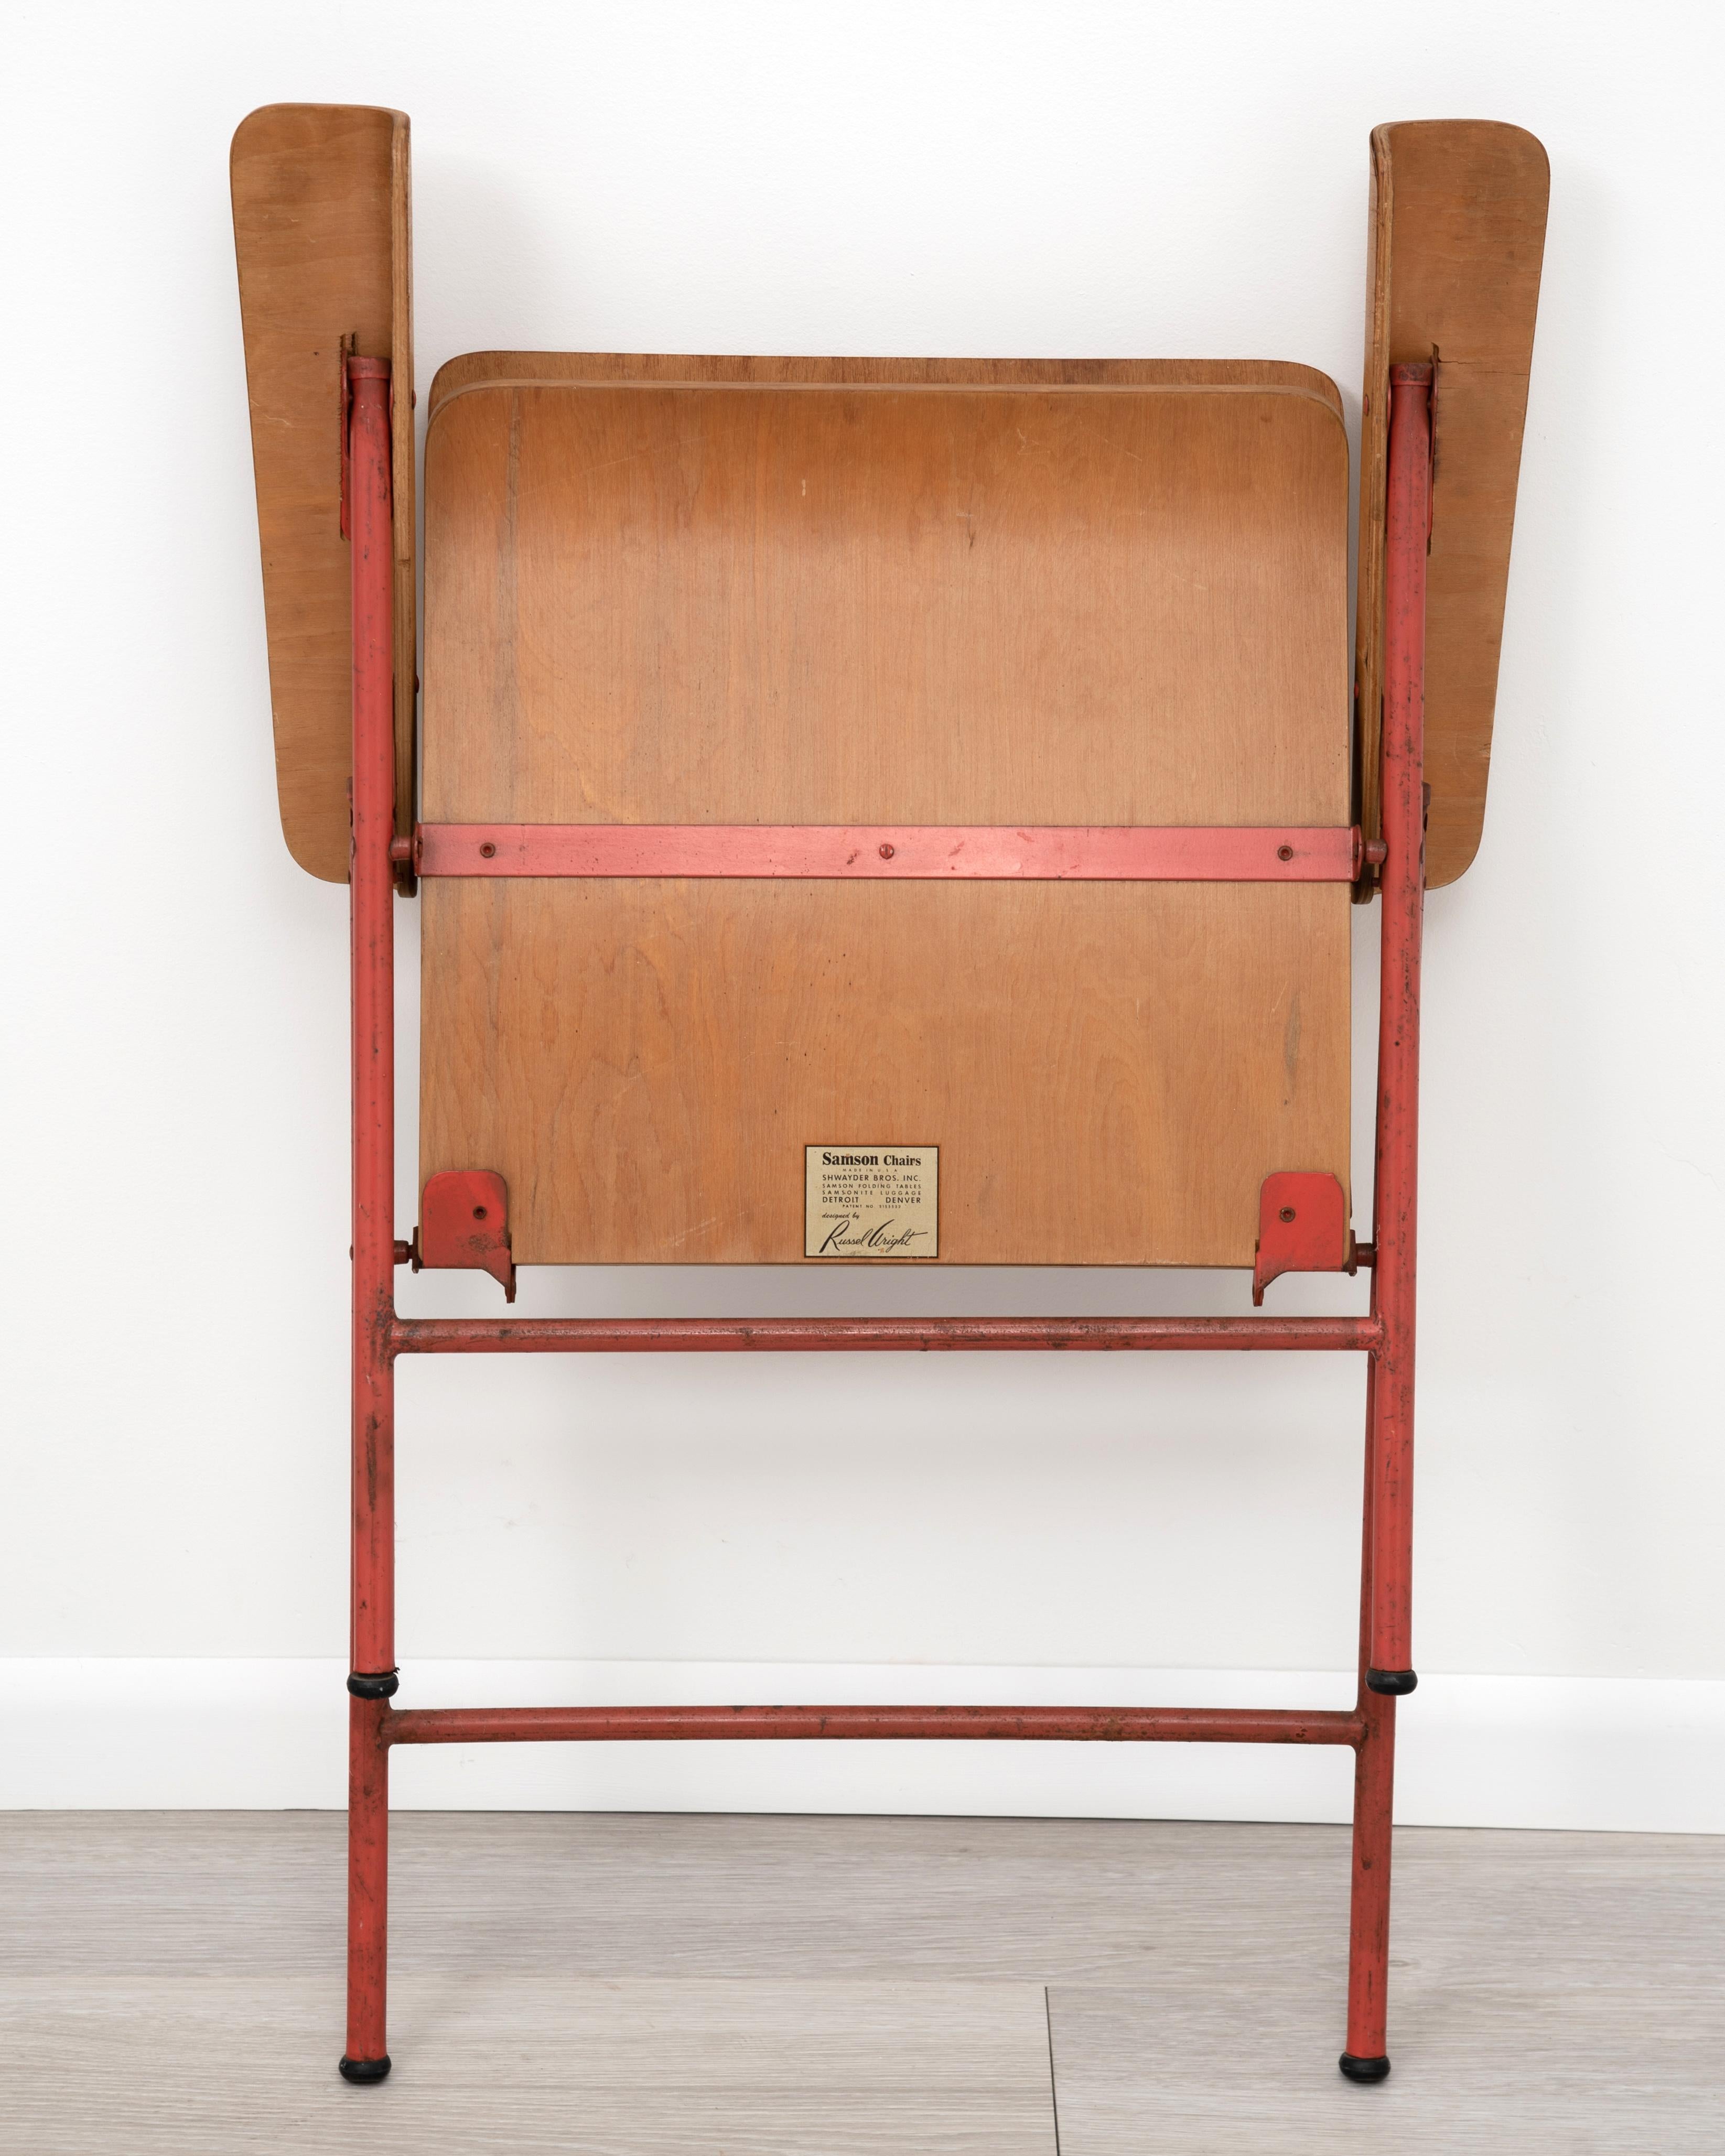 Samson Folding Chair Russel Wright Shwayder Bros Inc. 1950s For Sale 3